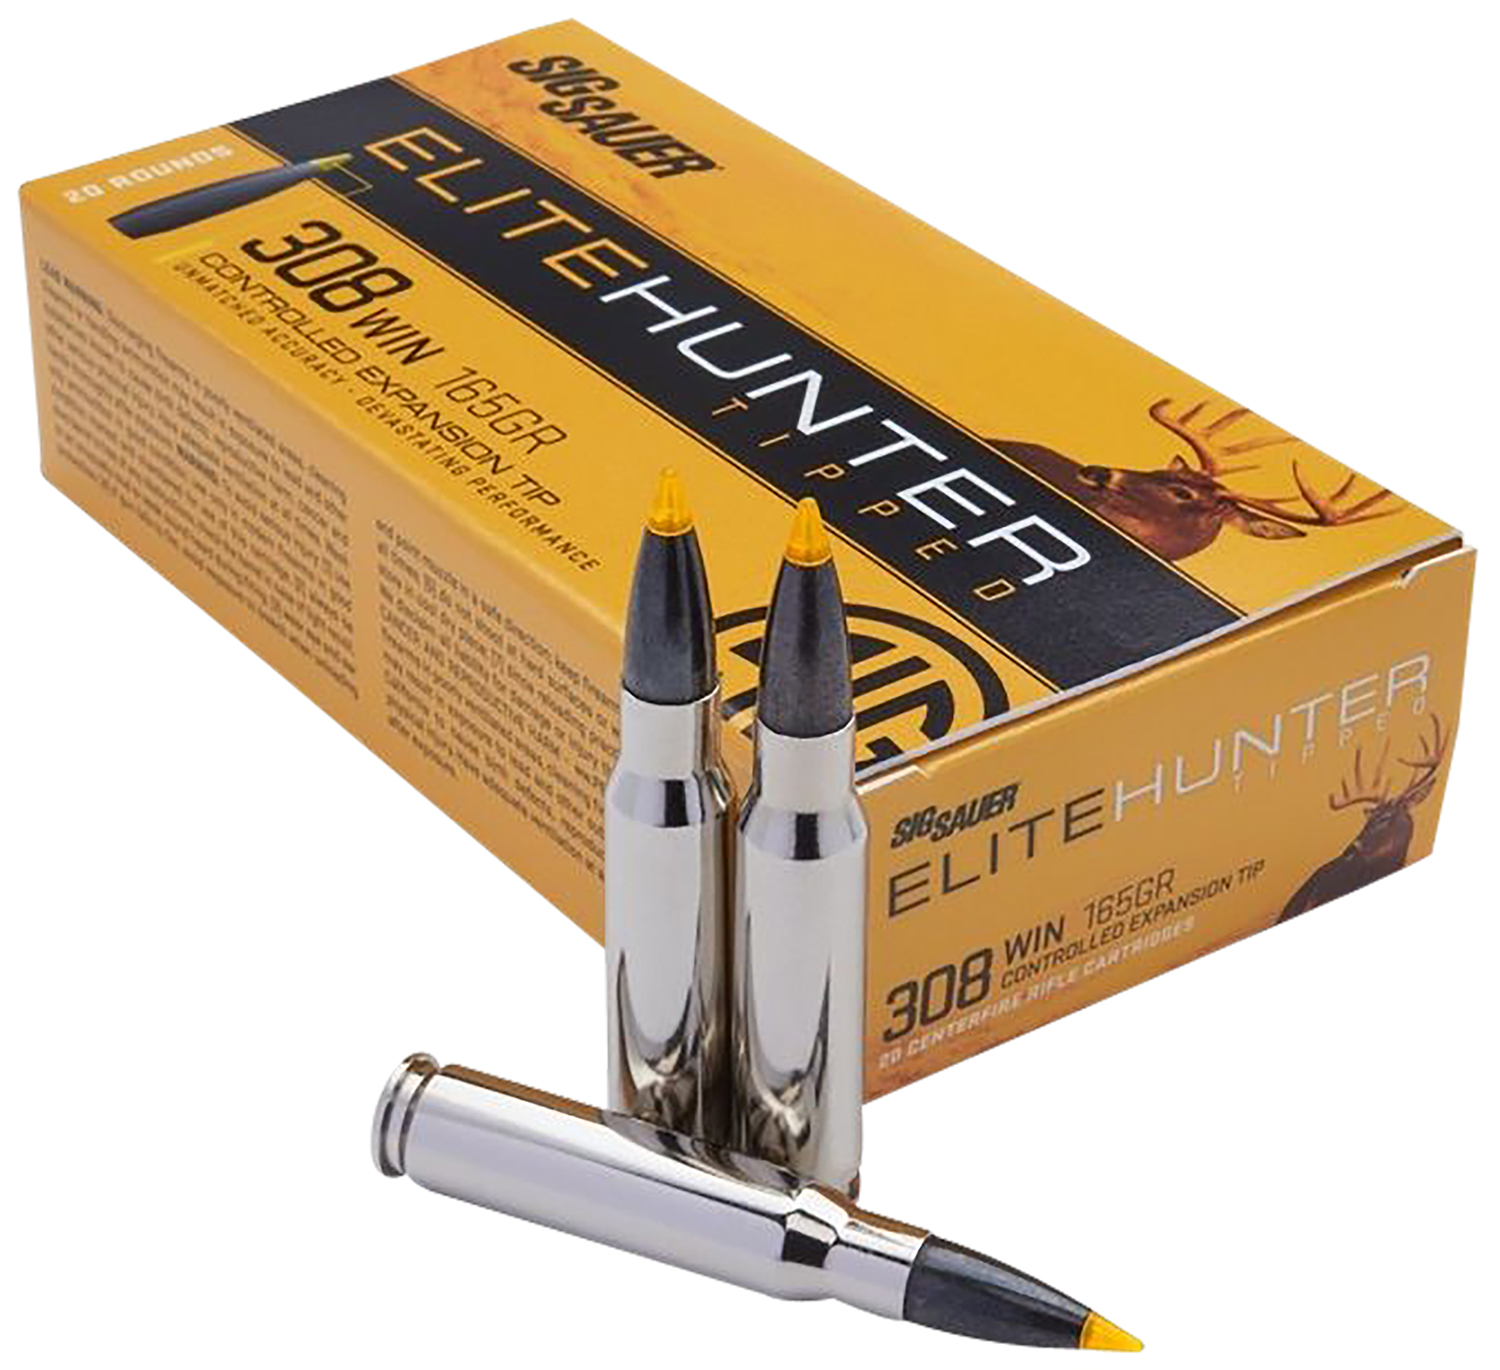 Sig Sauer E308TH220 Elite Hunter Tipped  308 Win 165 gr Controlled Expansion Tip 20 Bx/ 10 Cs